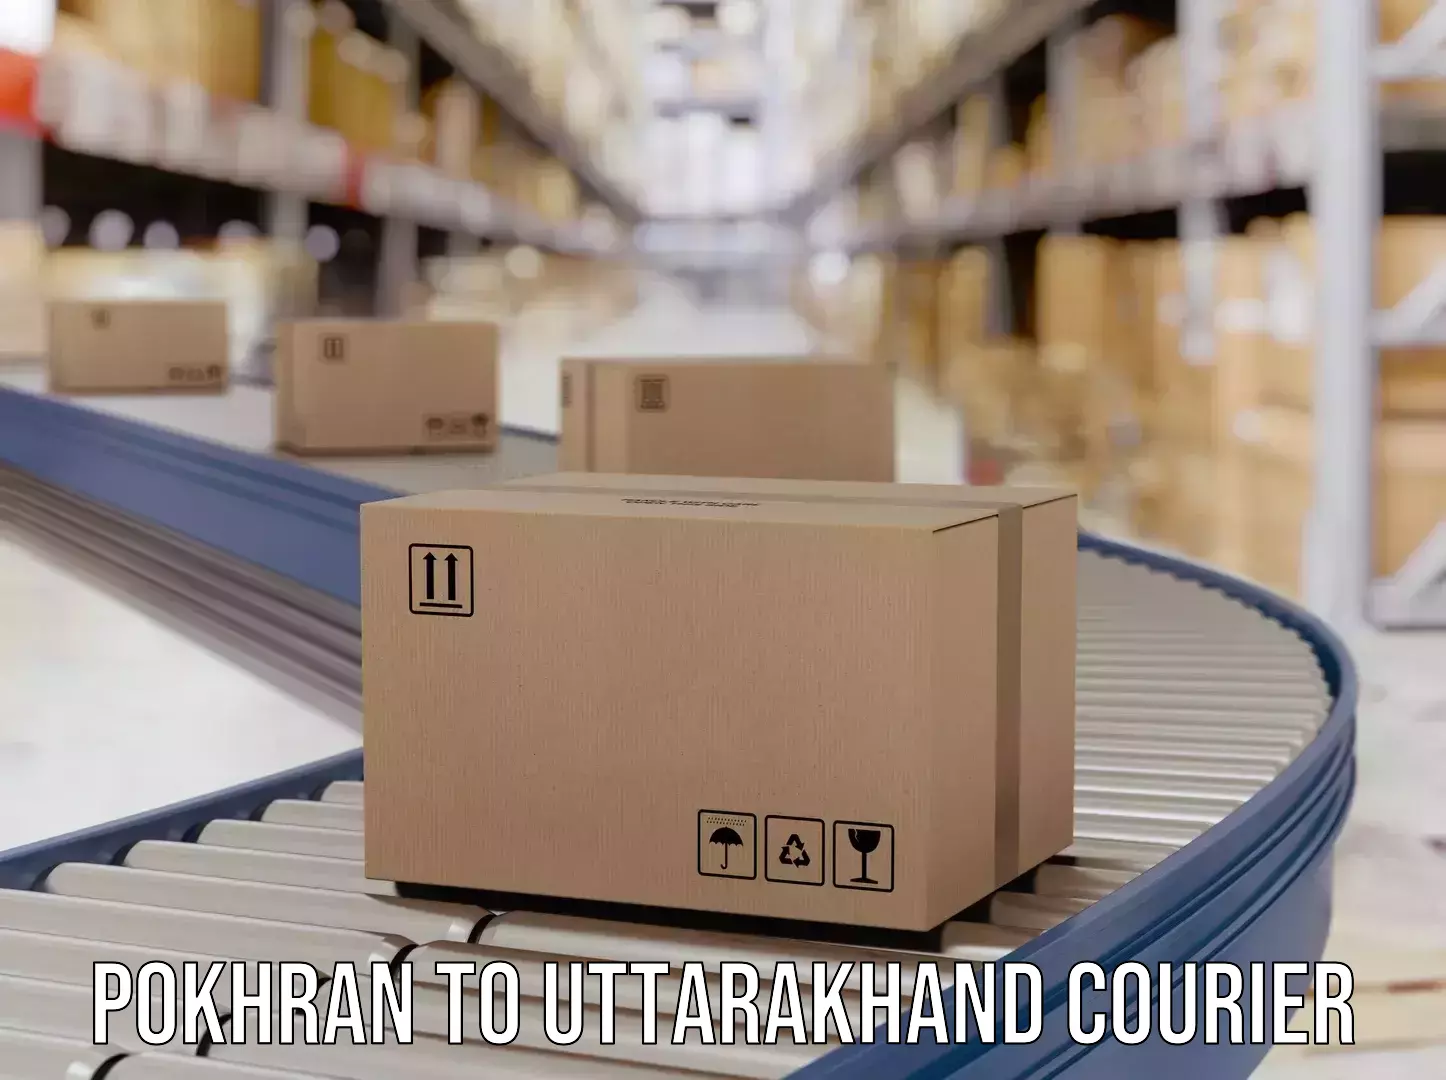 Express delivery solutions Pokhran to Tanakpur